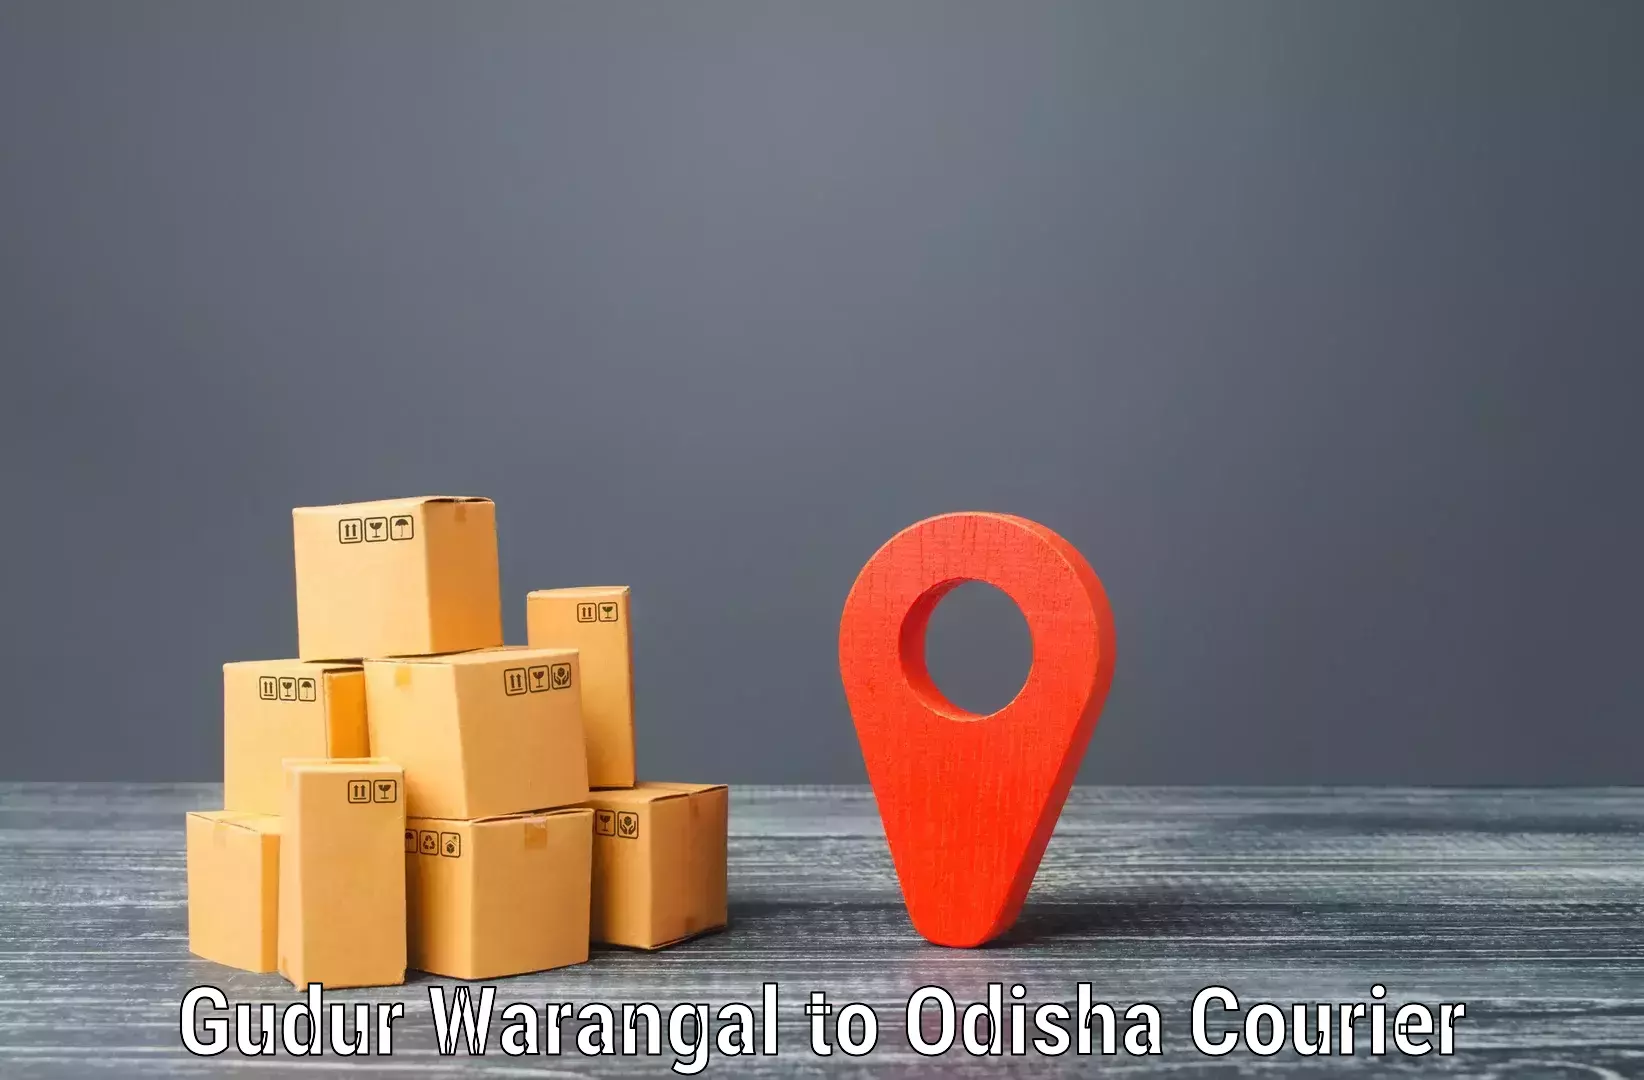 Parcel service for businesses Gudur Warangal to Asika